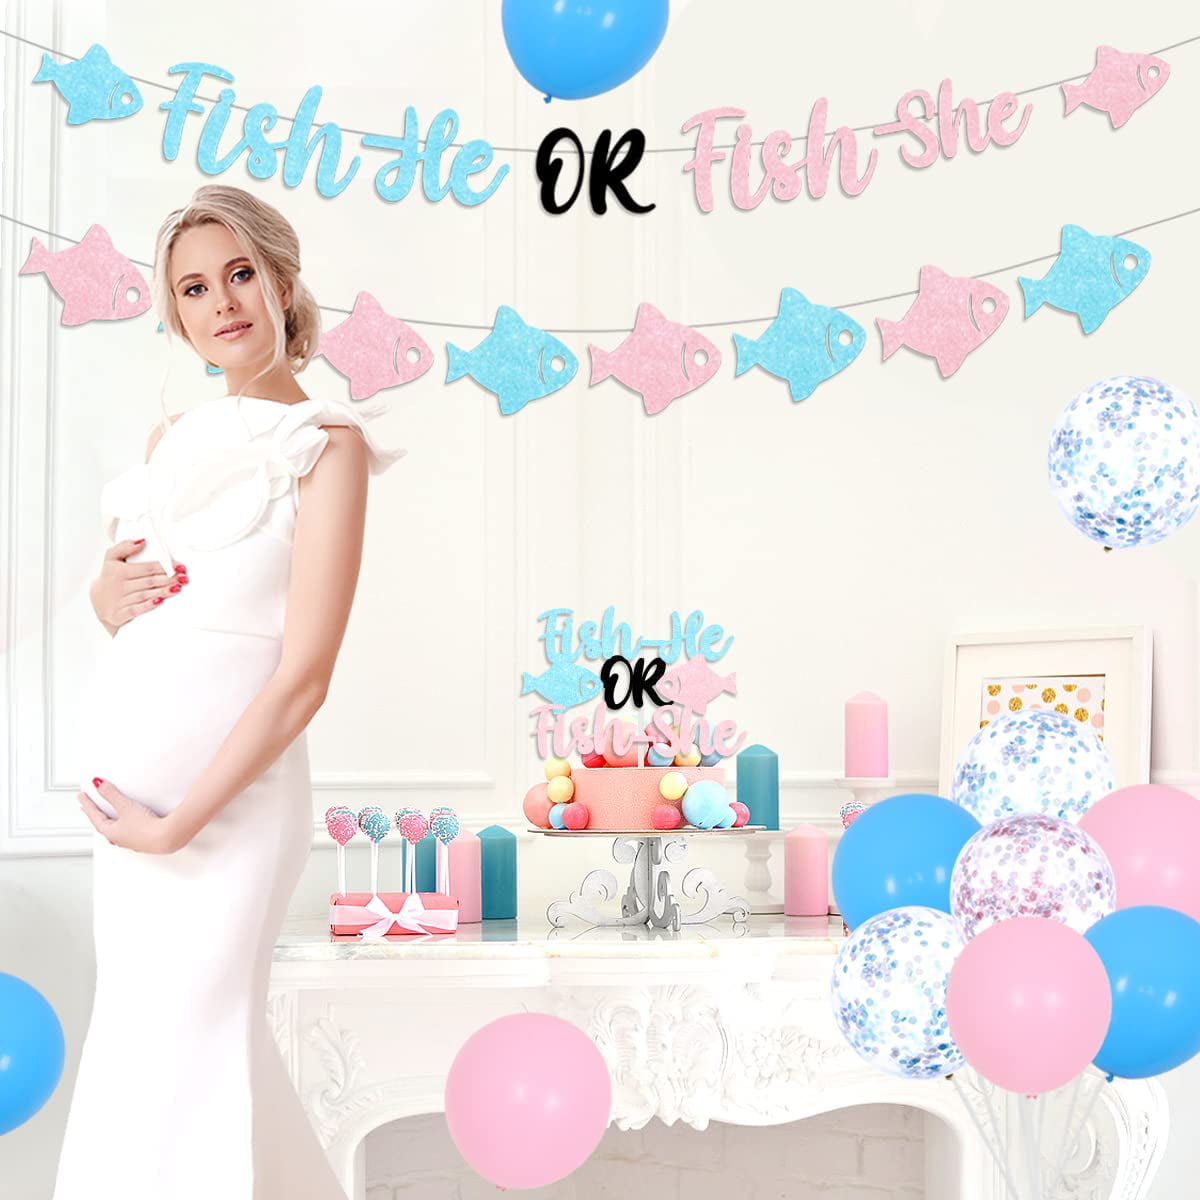 Gender Reveal Party Decorations, FiSHE or FisHE Theme Banner, Fishing HE or  SHE Party Sign, Fisherman Bunting Supplies and Favors for Boys or Girls